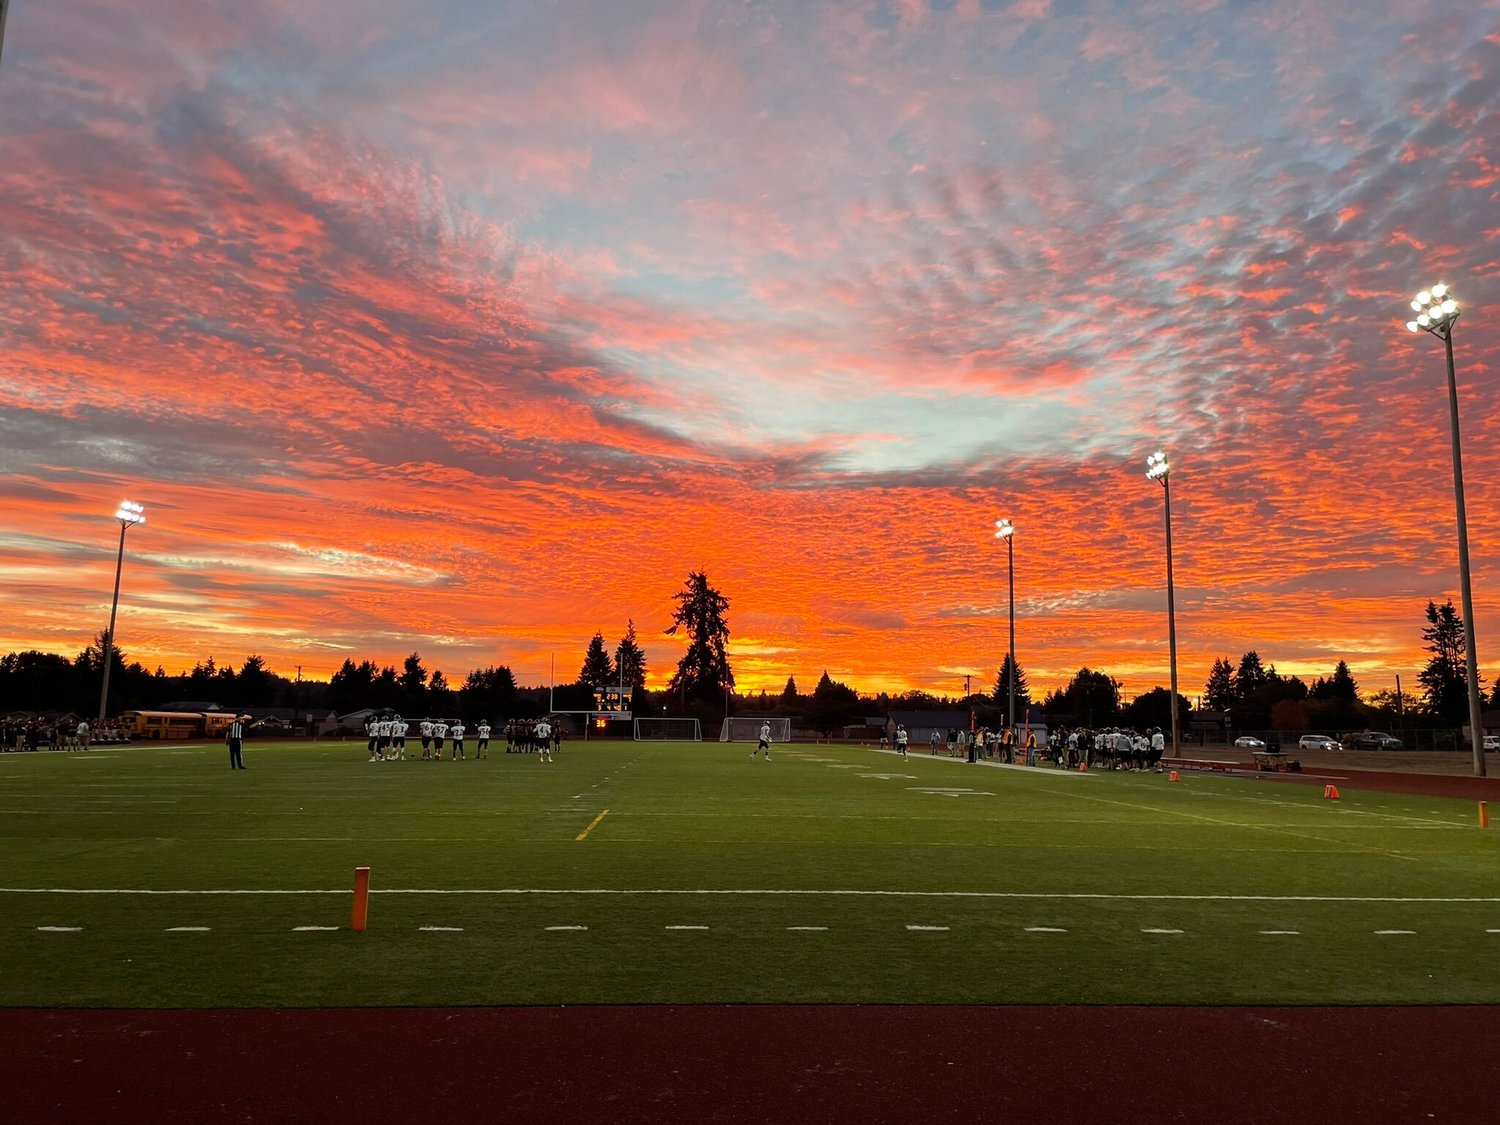 The sunset made the perfect backdrop for a football game between Black Hills and Centralia on Friday night.